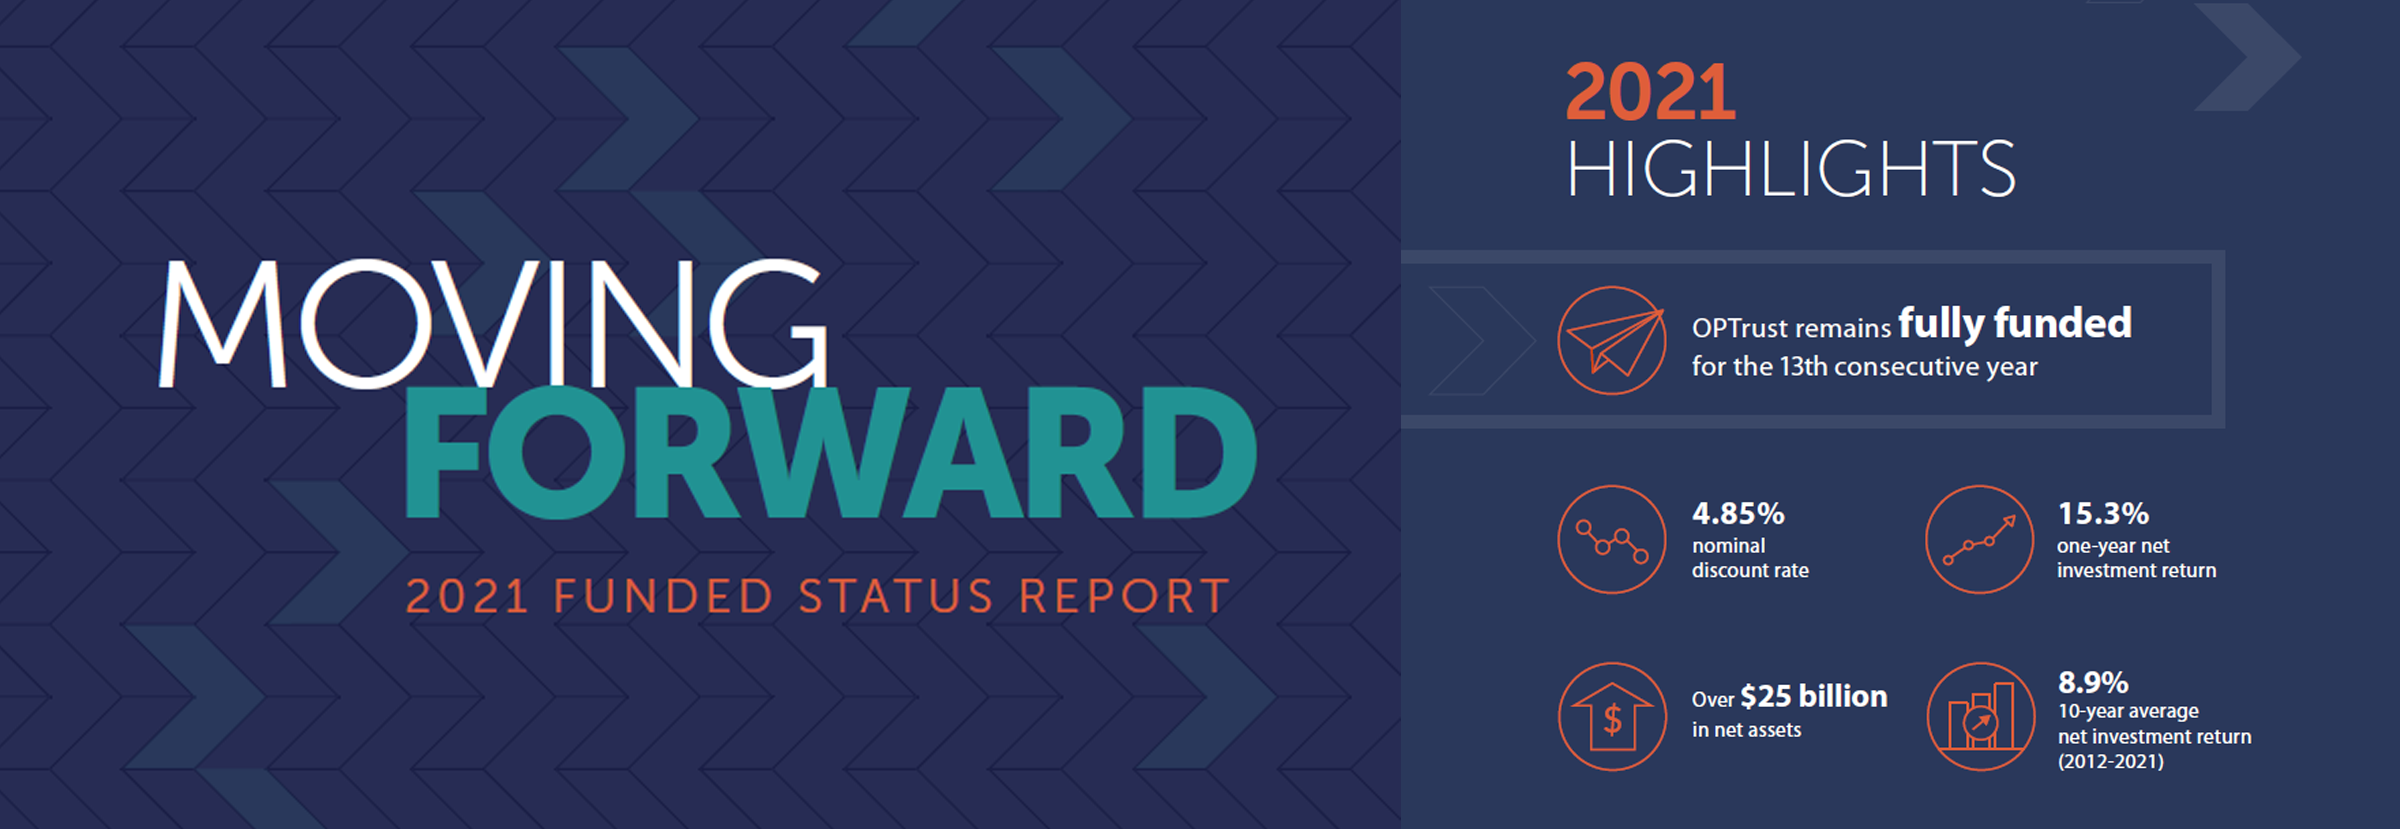 2021 OPTrust Funded Status Report, Moving Forward